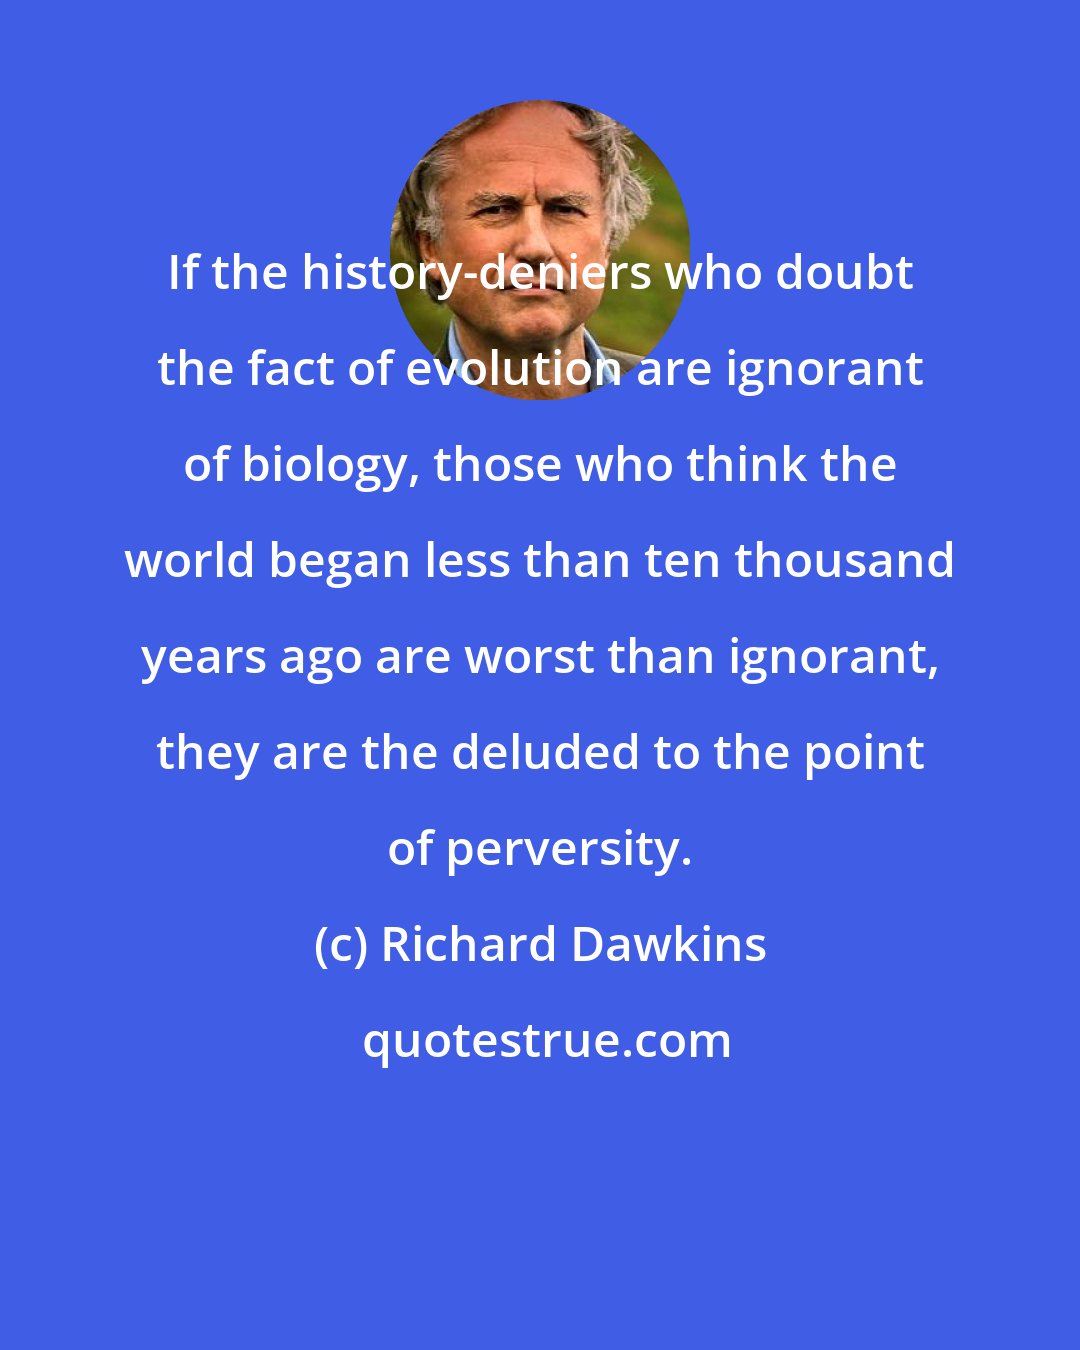 Richard Dawkins: If the history-deniers who doubt the fact of evolution are ignorant of biology, those who think the world began less than ten thousand years ago are worst than ignorant, they are the deluded to the point of perversity.